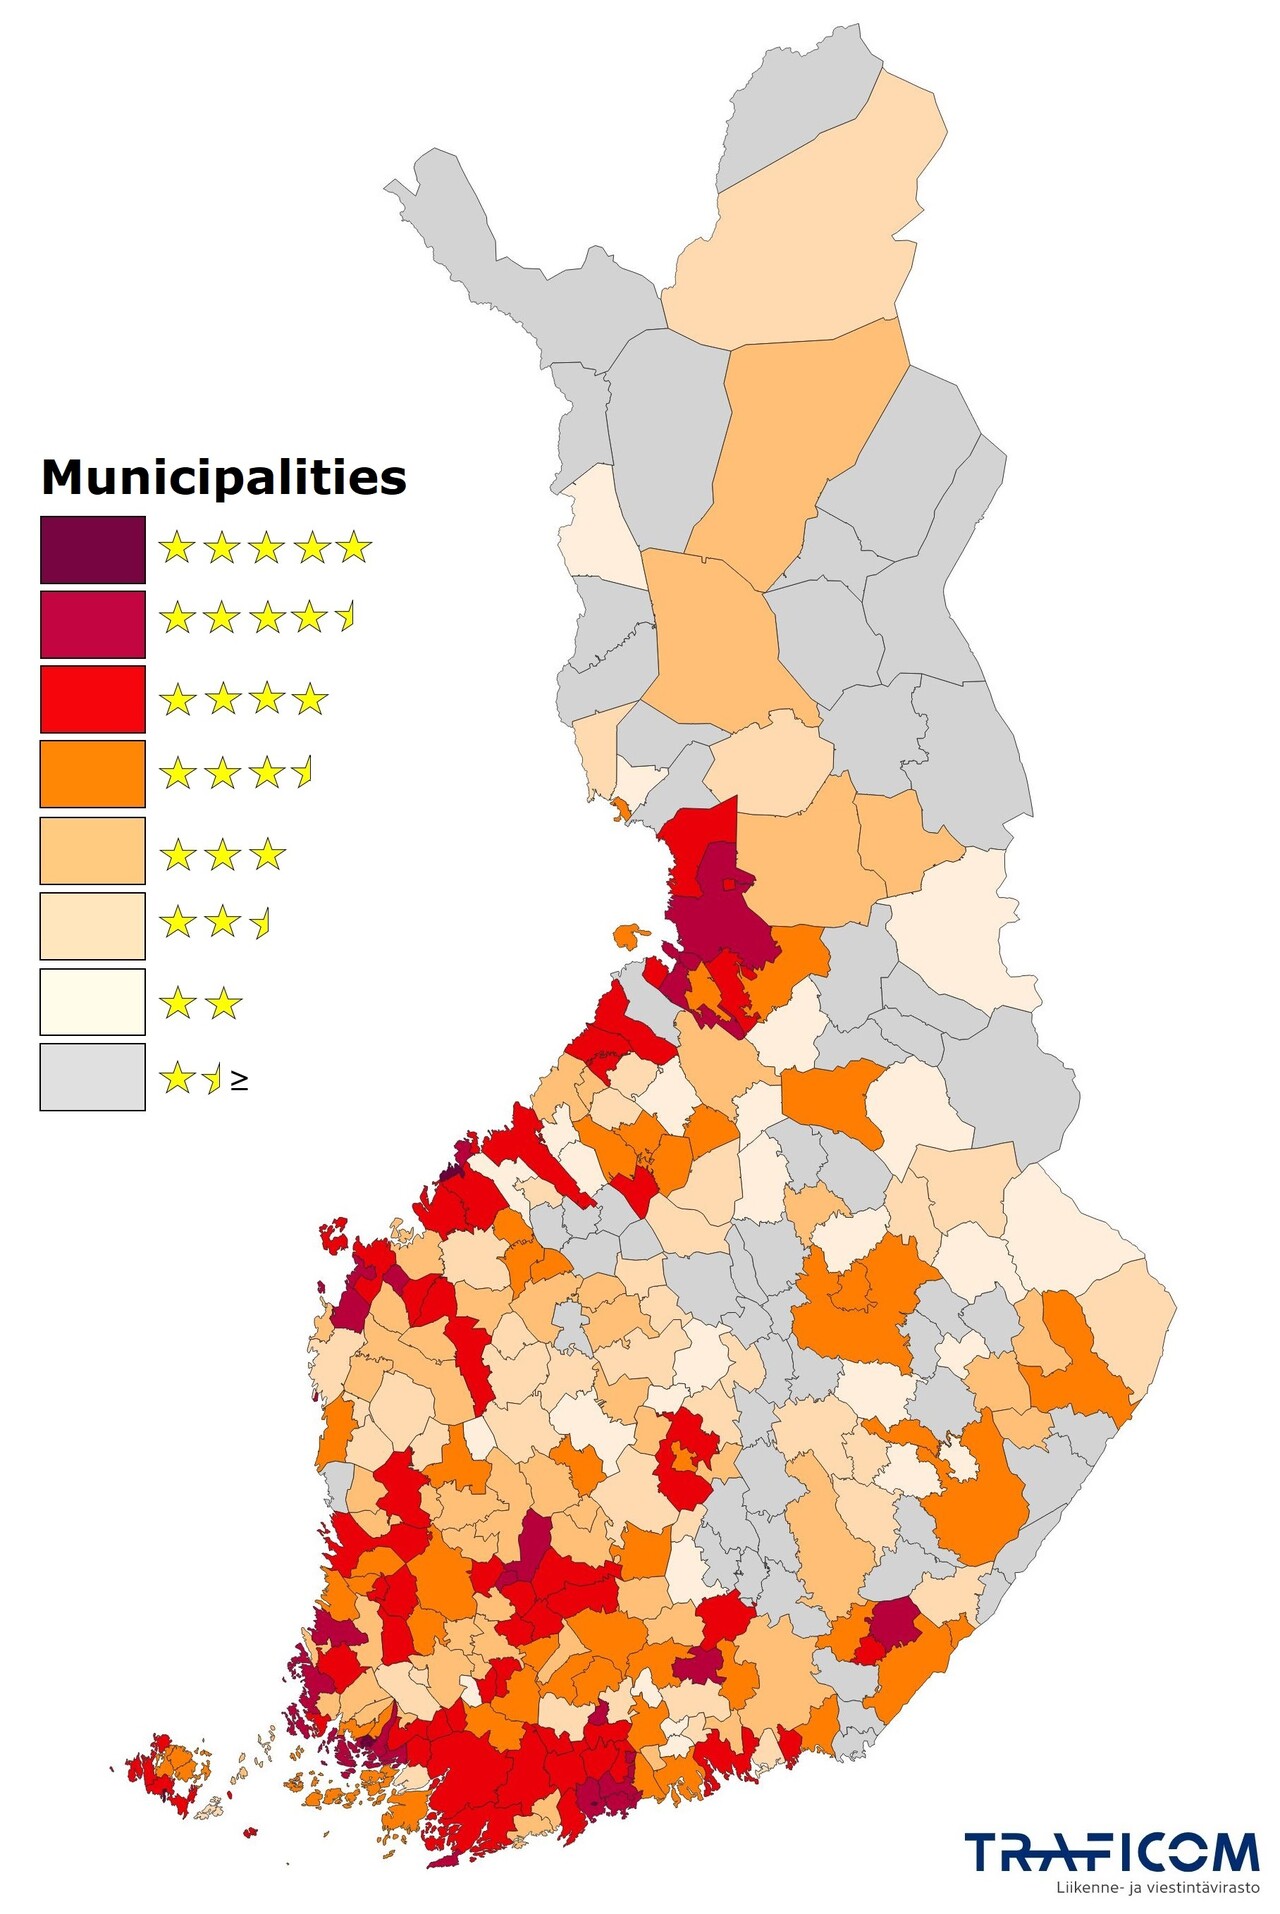 A map showing the star ratings given to municipalities in Traficom’s broadband rating.